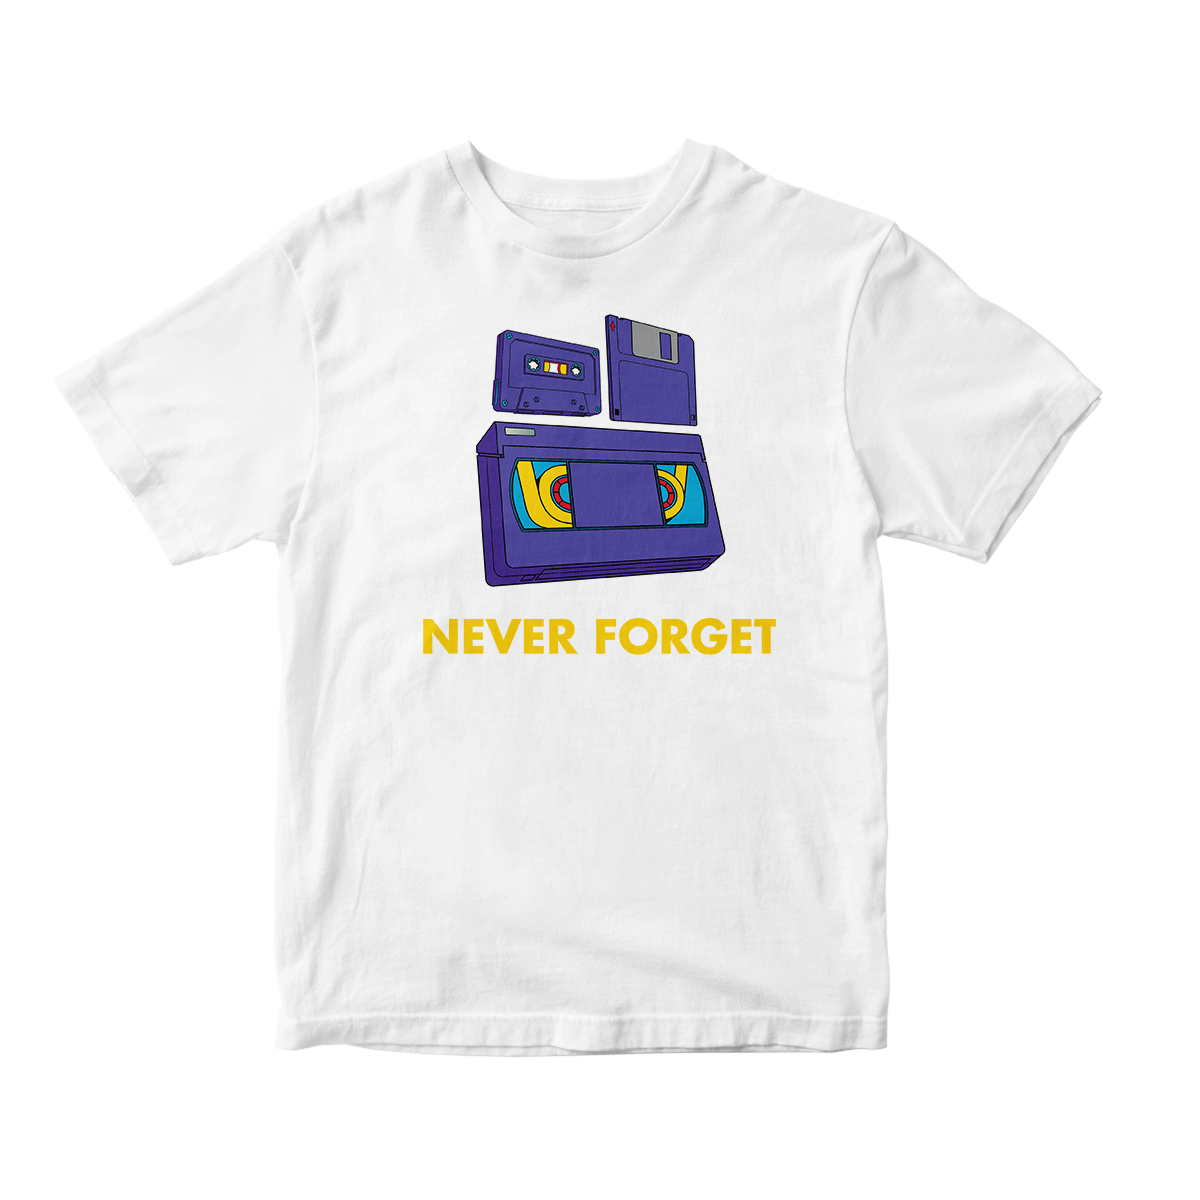 Never Forget in White Aqua CW Short Sleeve Tee